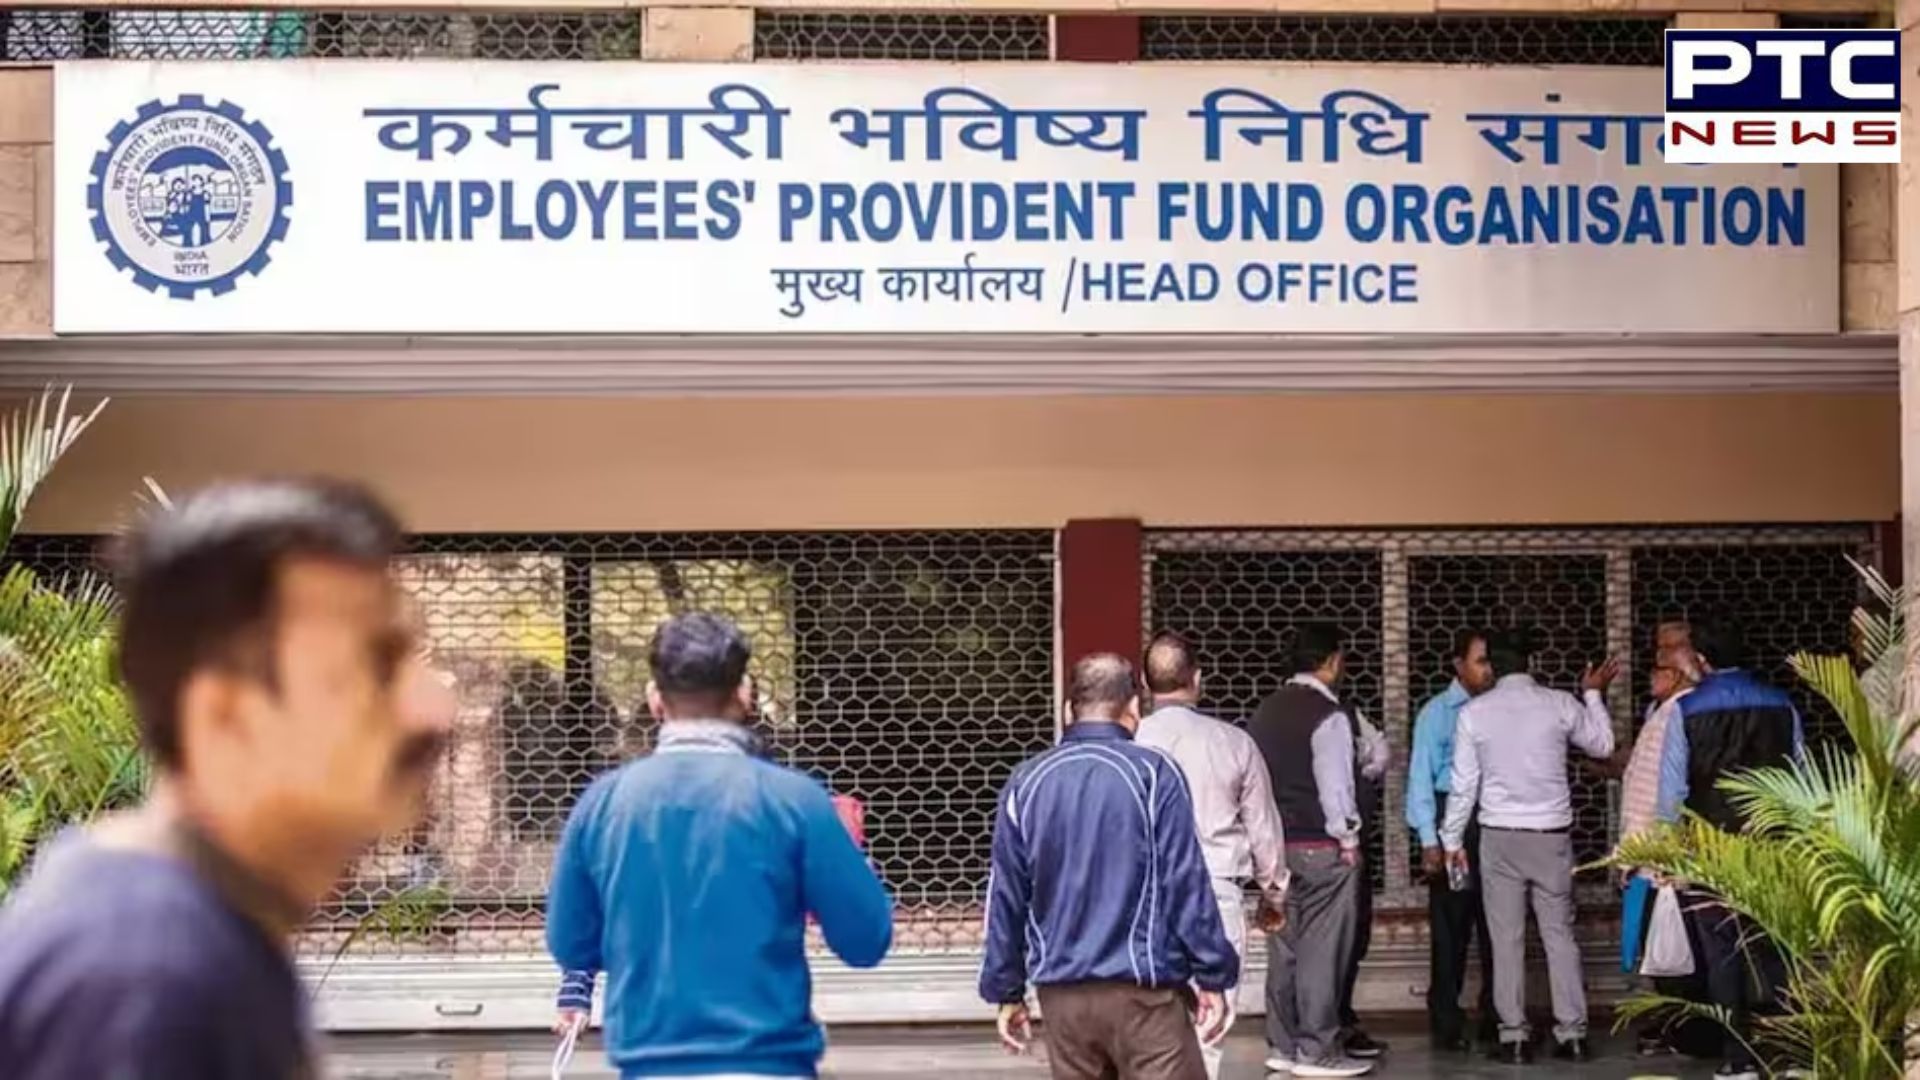 EPFO's new regulation effective from April 1